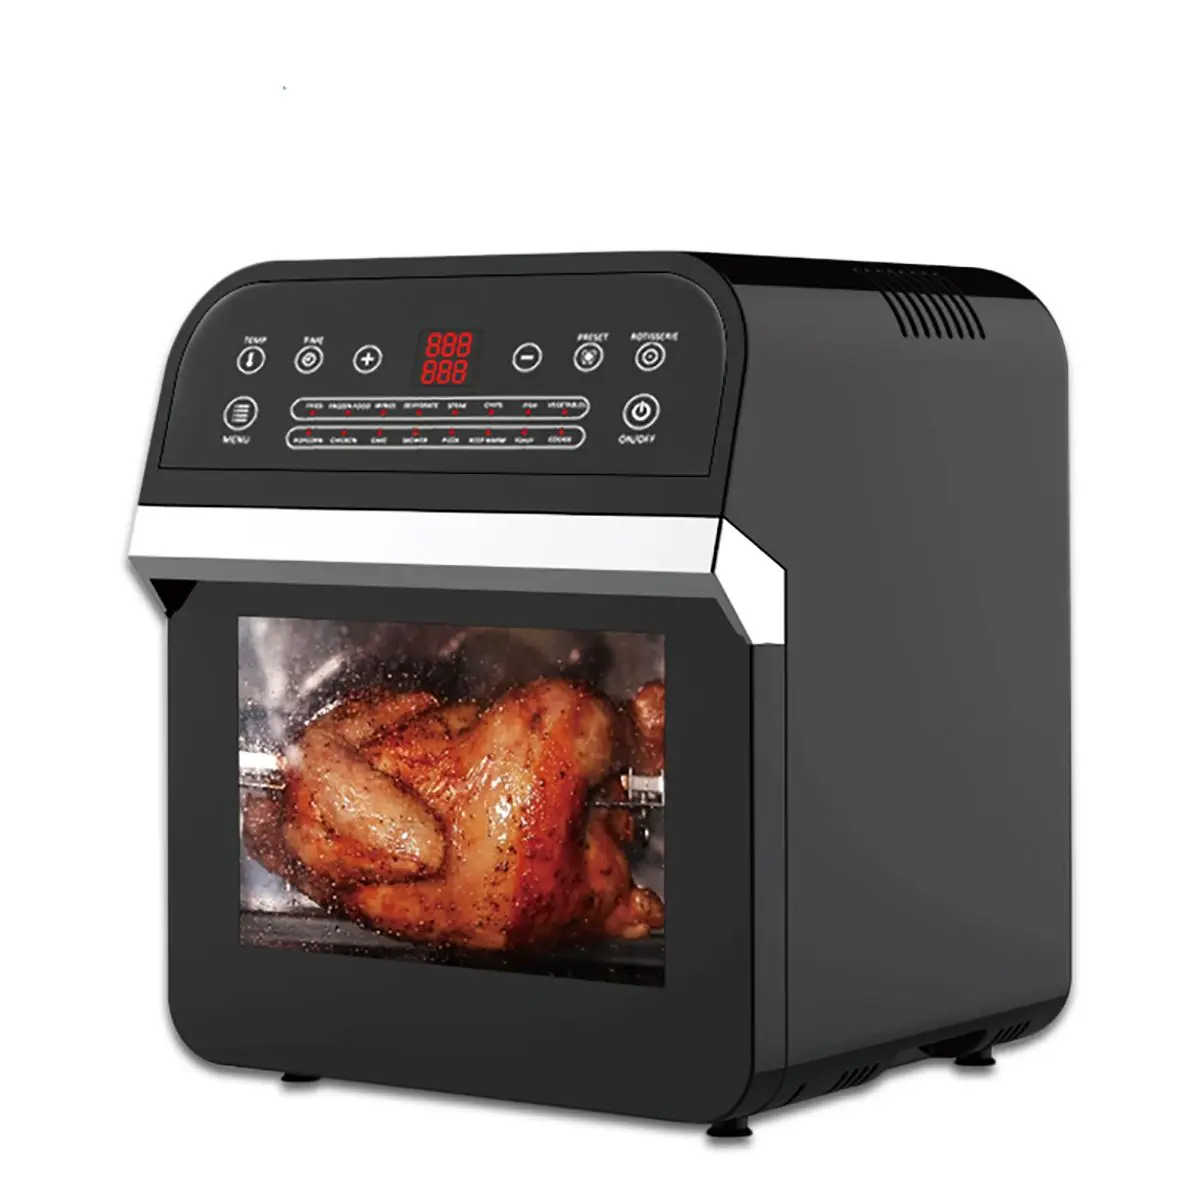 

16-in-1 Countertop Oven Cooking Tools 12L 1600W Air Fryer Oven Toaster Rotisserie Dehydrator LED Display Digital Touch Screen